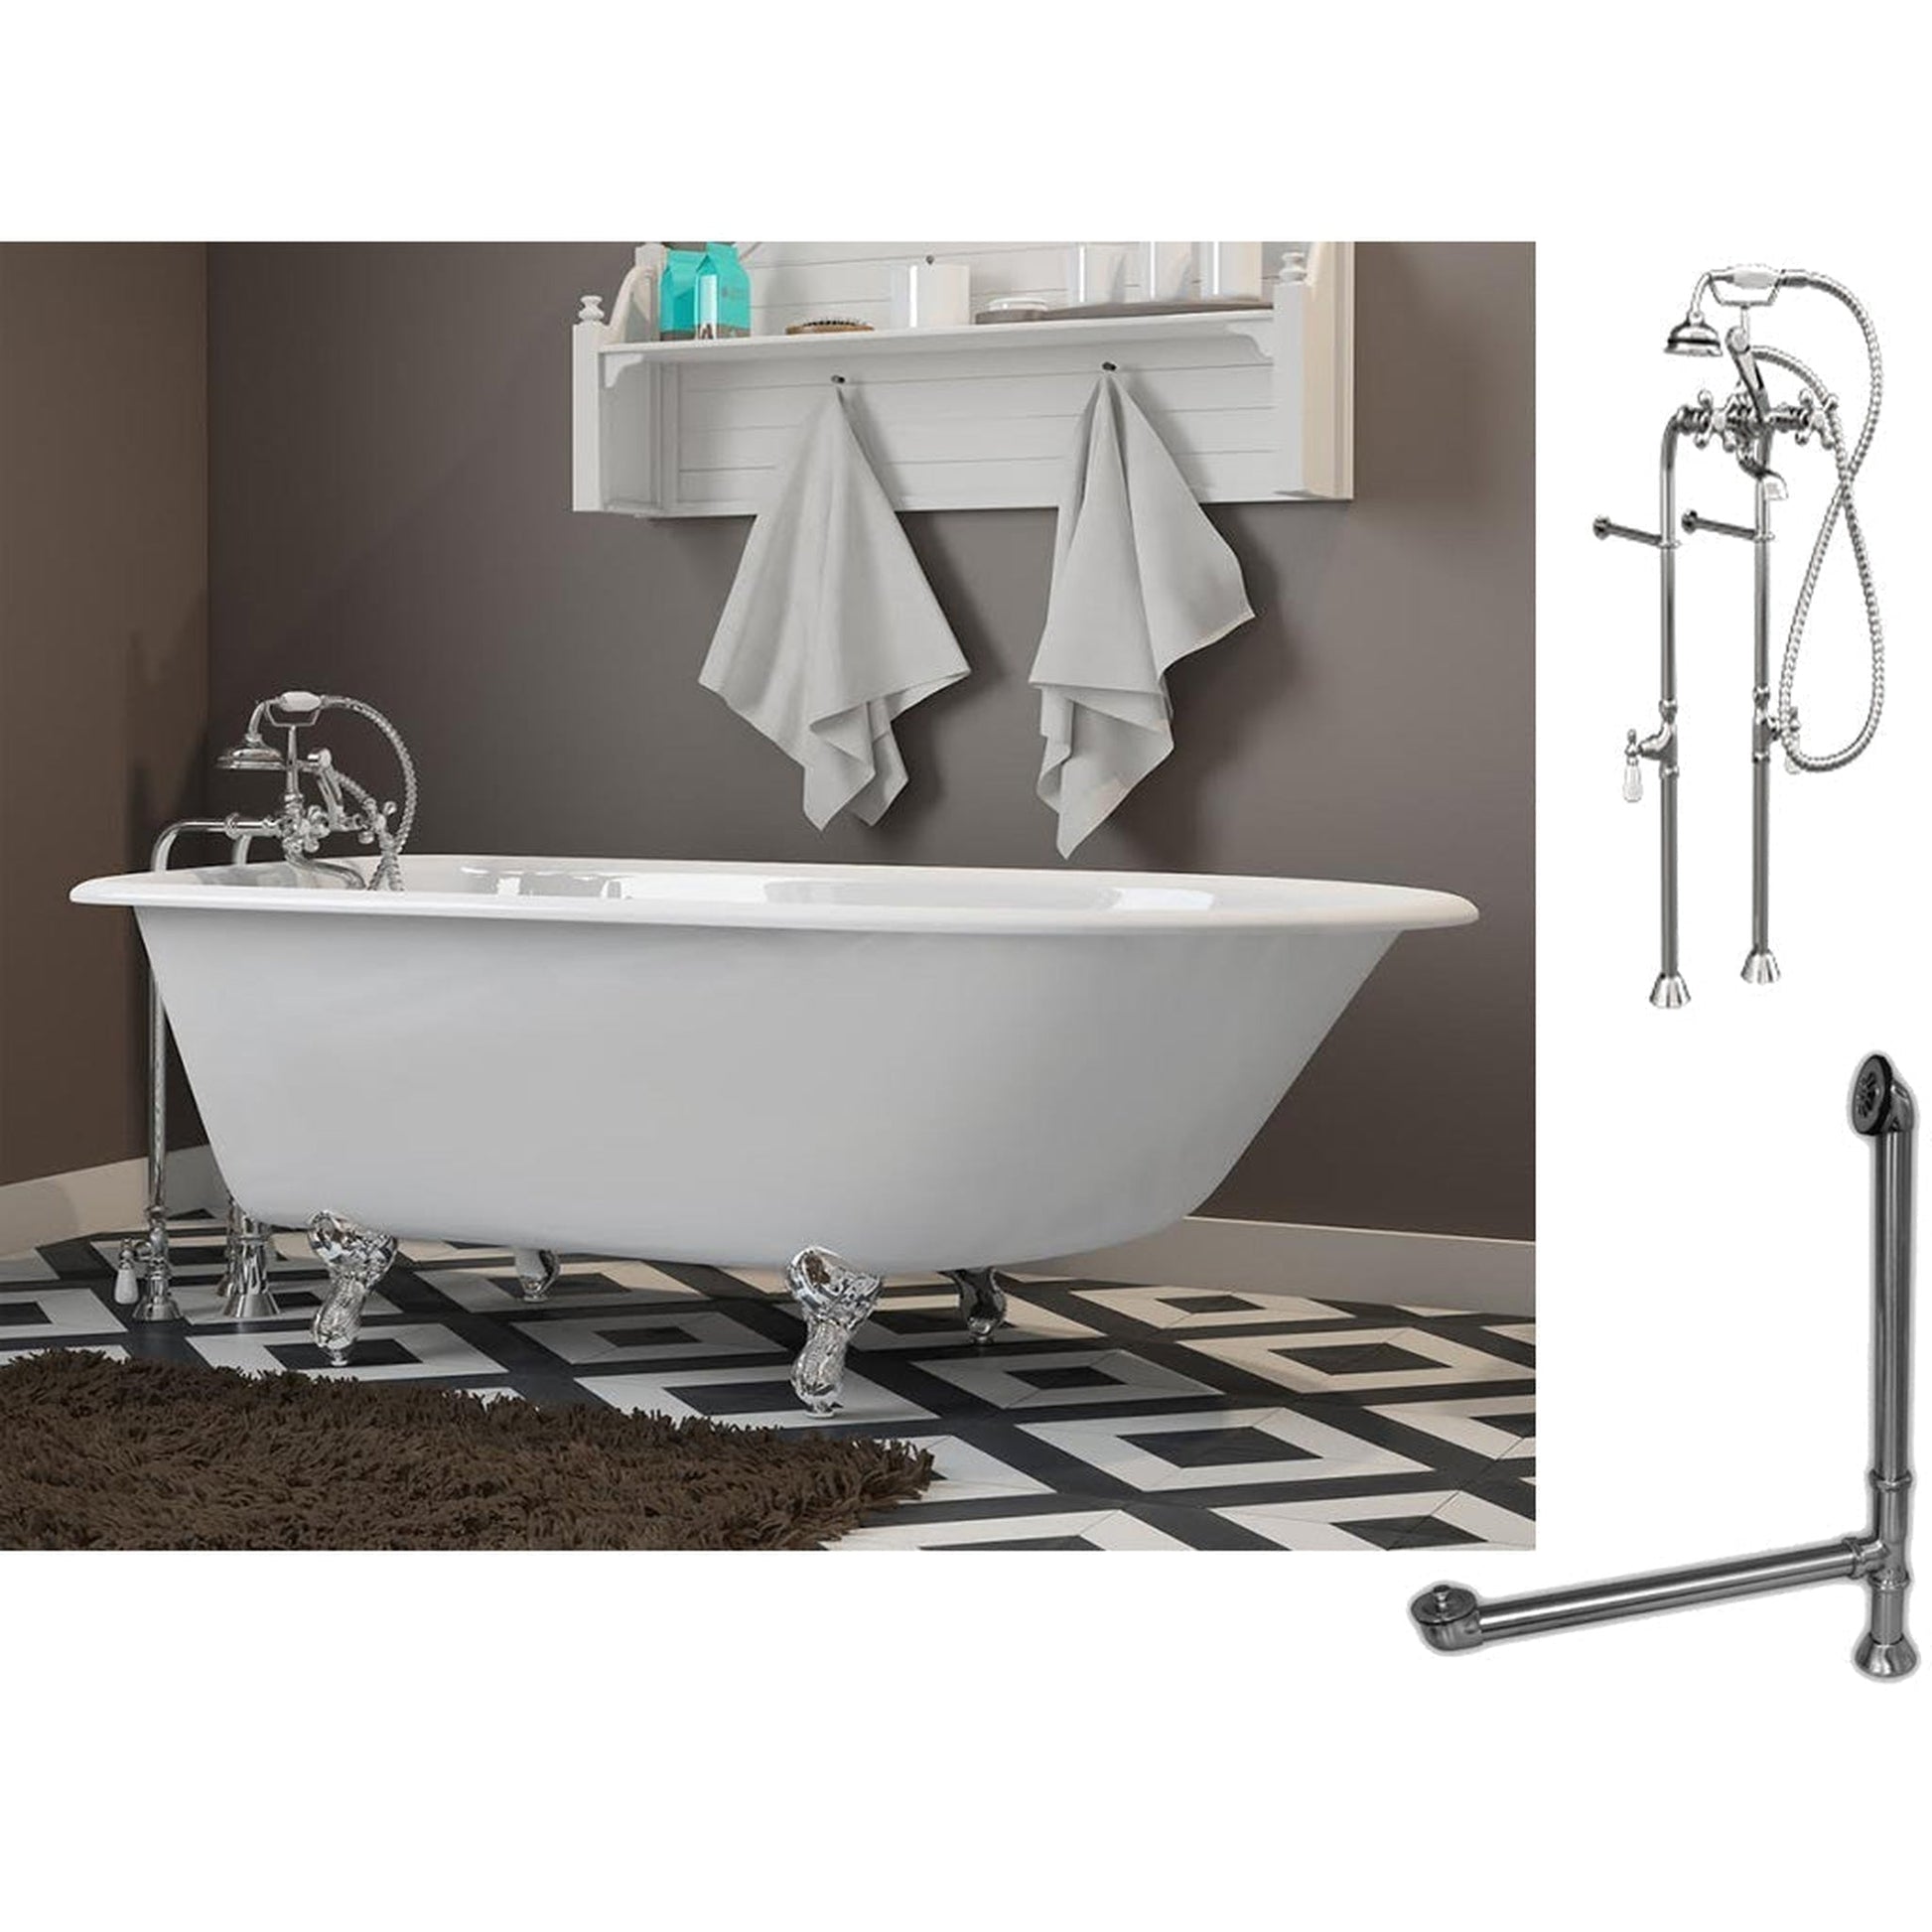 Cambridge Plumbing 60" White Cast Iron Rolled Rim Clawfoot Bathtub With No Deck Holes And Complete Plumbing Package Including Floor Mounted British Telephone Faucet, Drain And Overflow Assembly In Polished Chrome